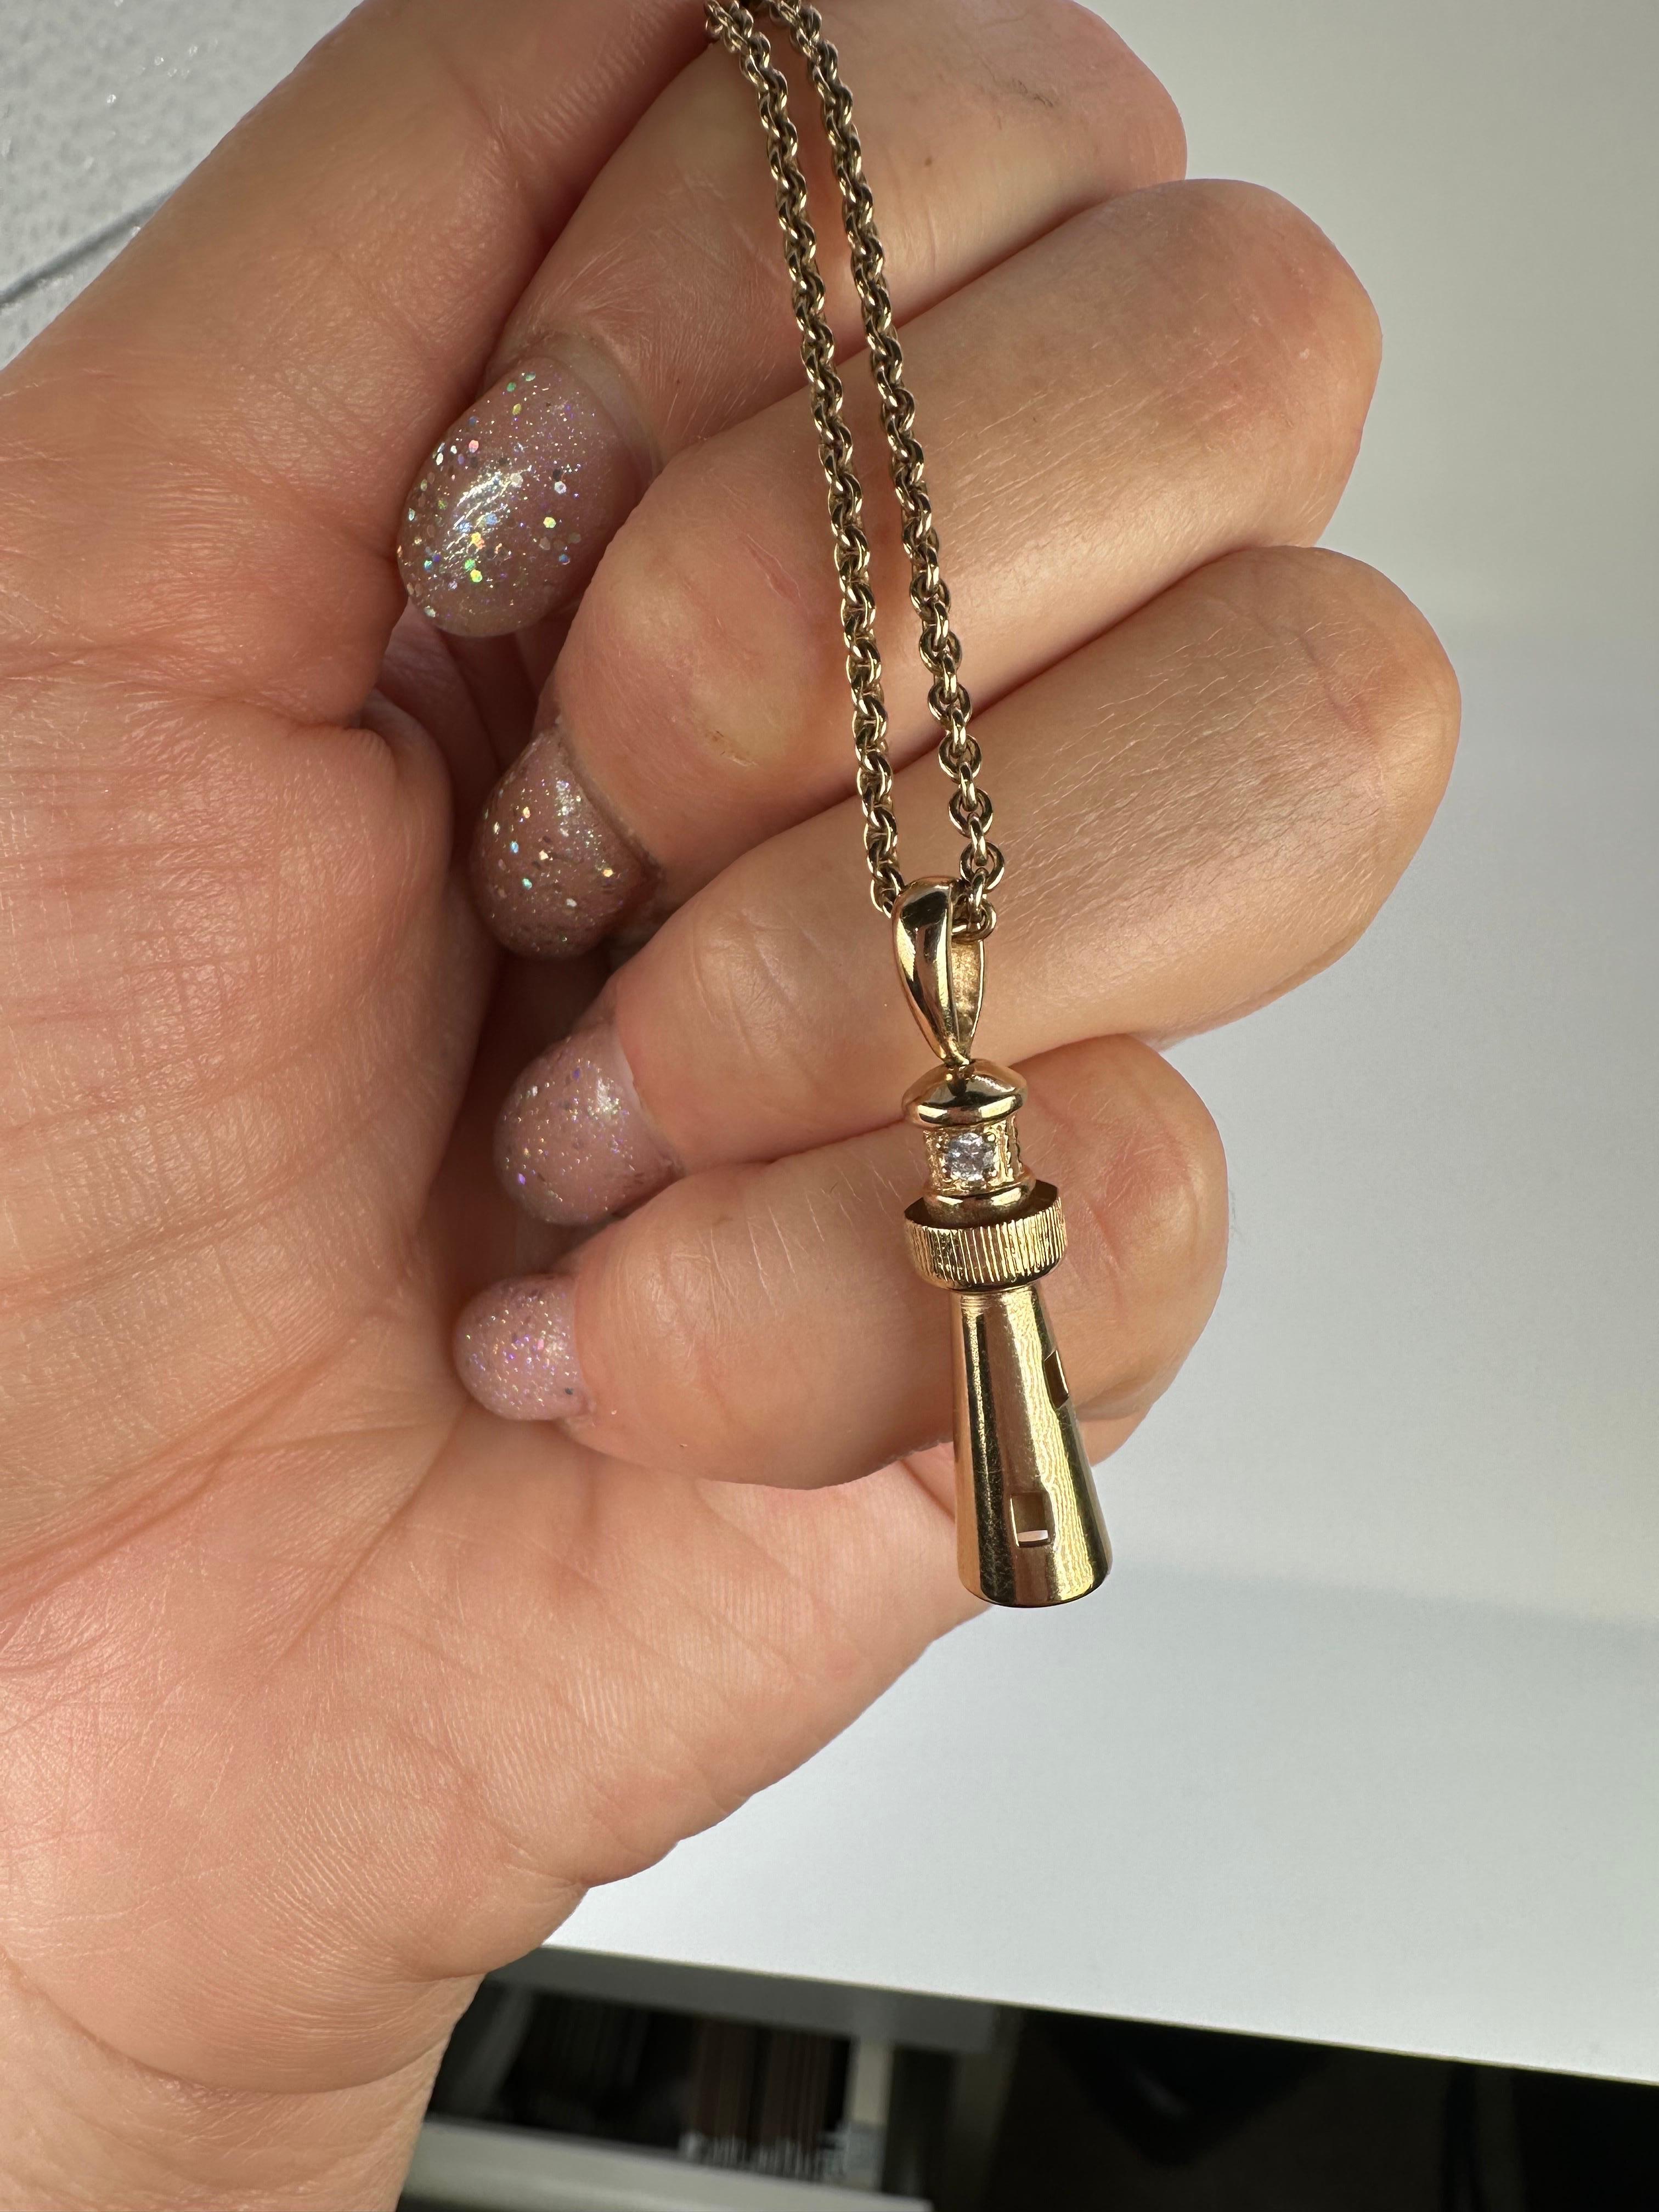 Diamond Lighthouse Pendant Necklace 14 Karat Yellow Gold In New Condition For Sale In Jupiter, FL